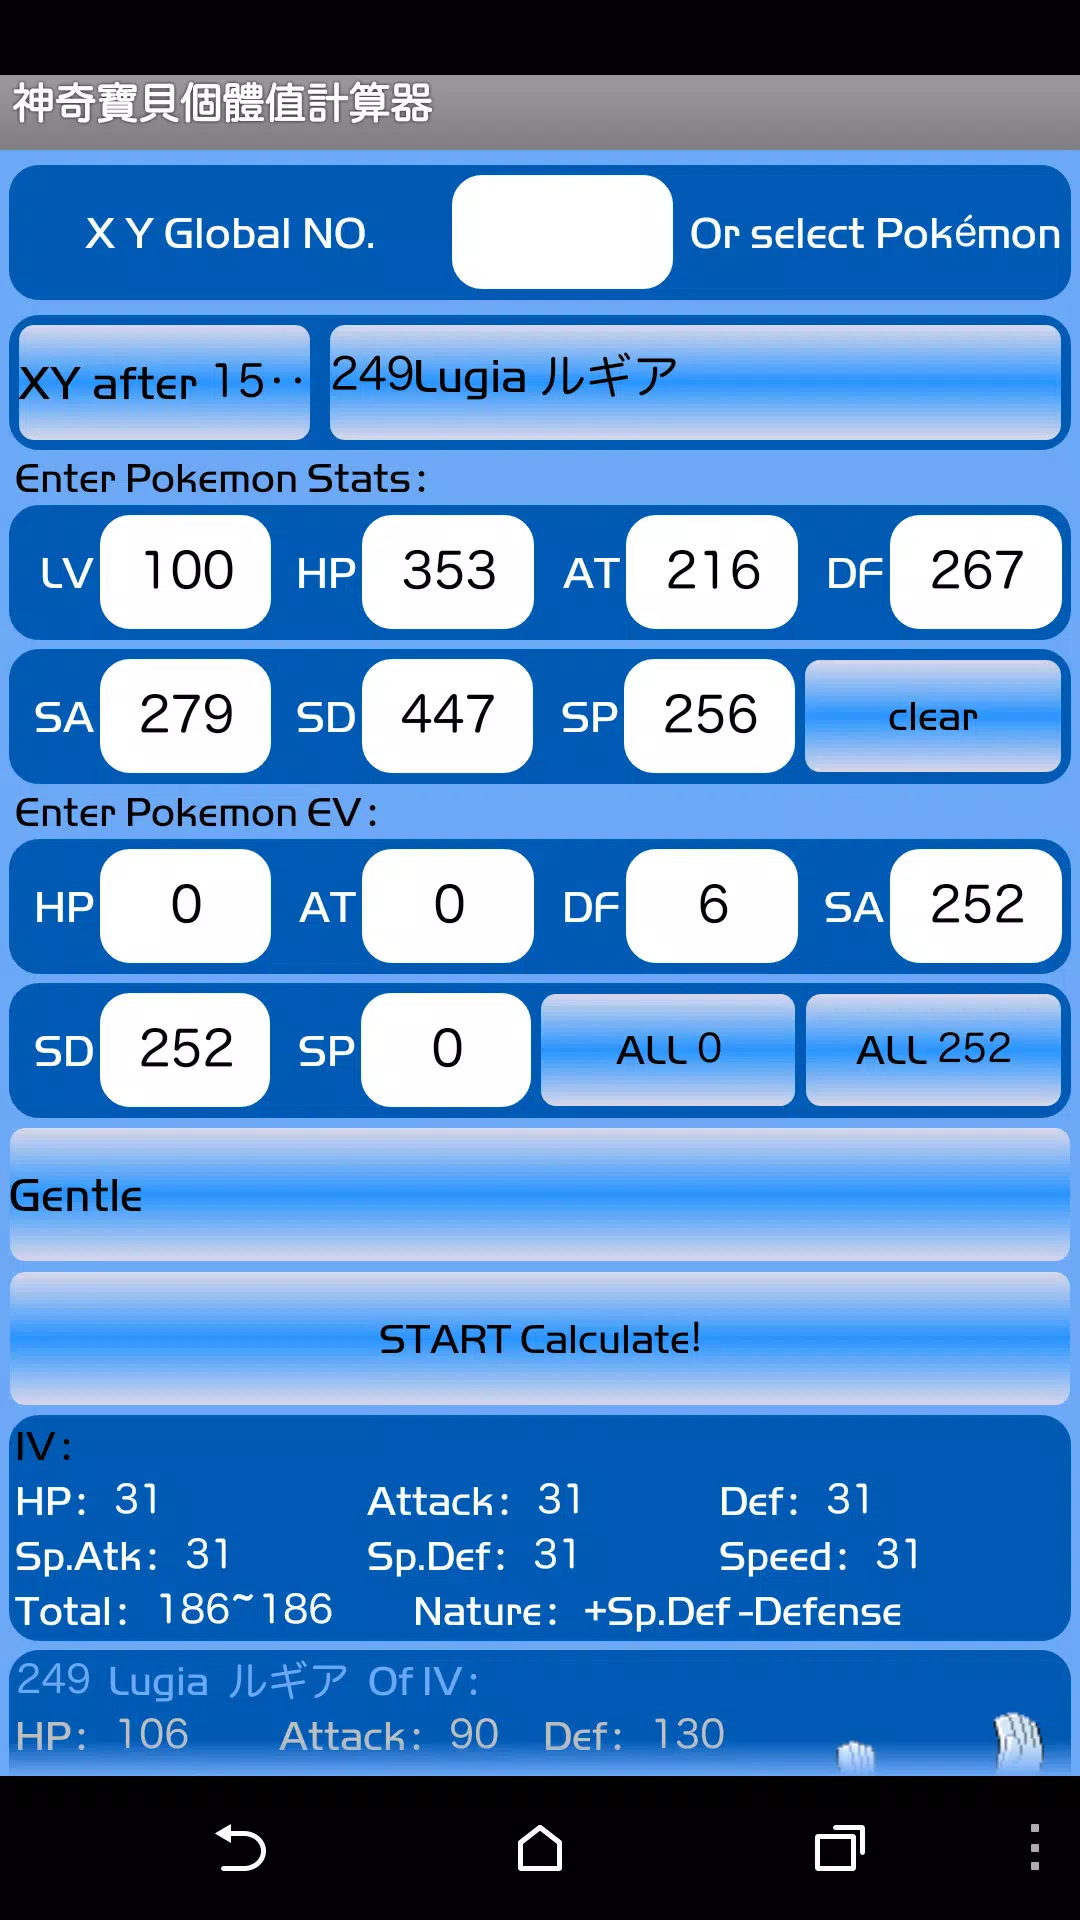 Pokémon IV calculator for Android - APK Download